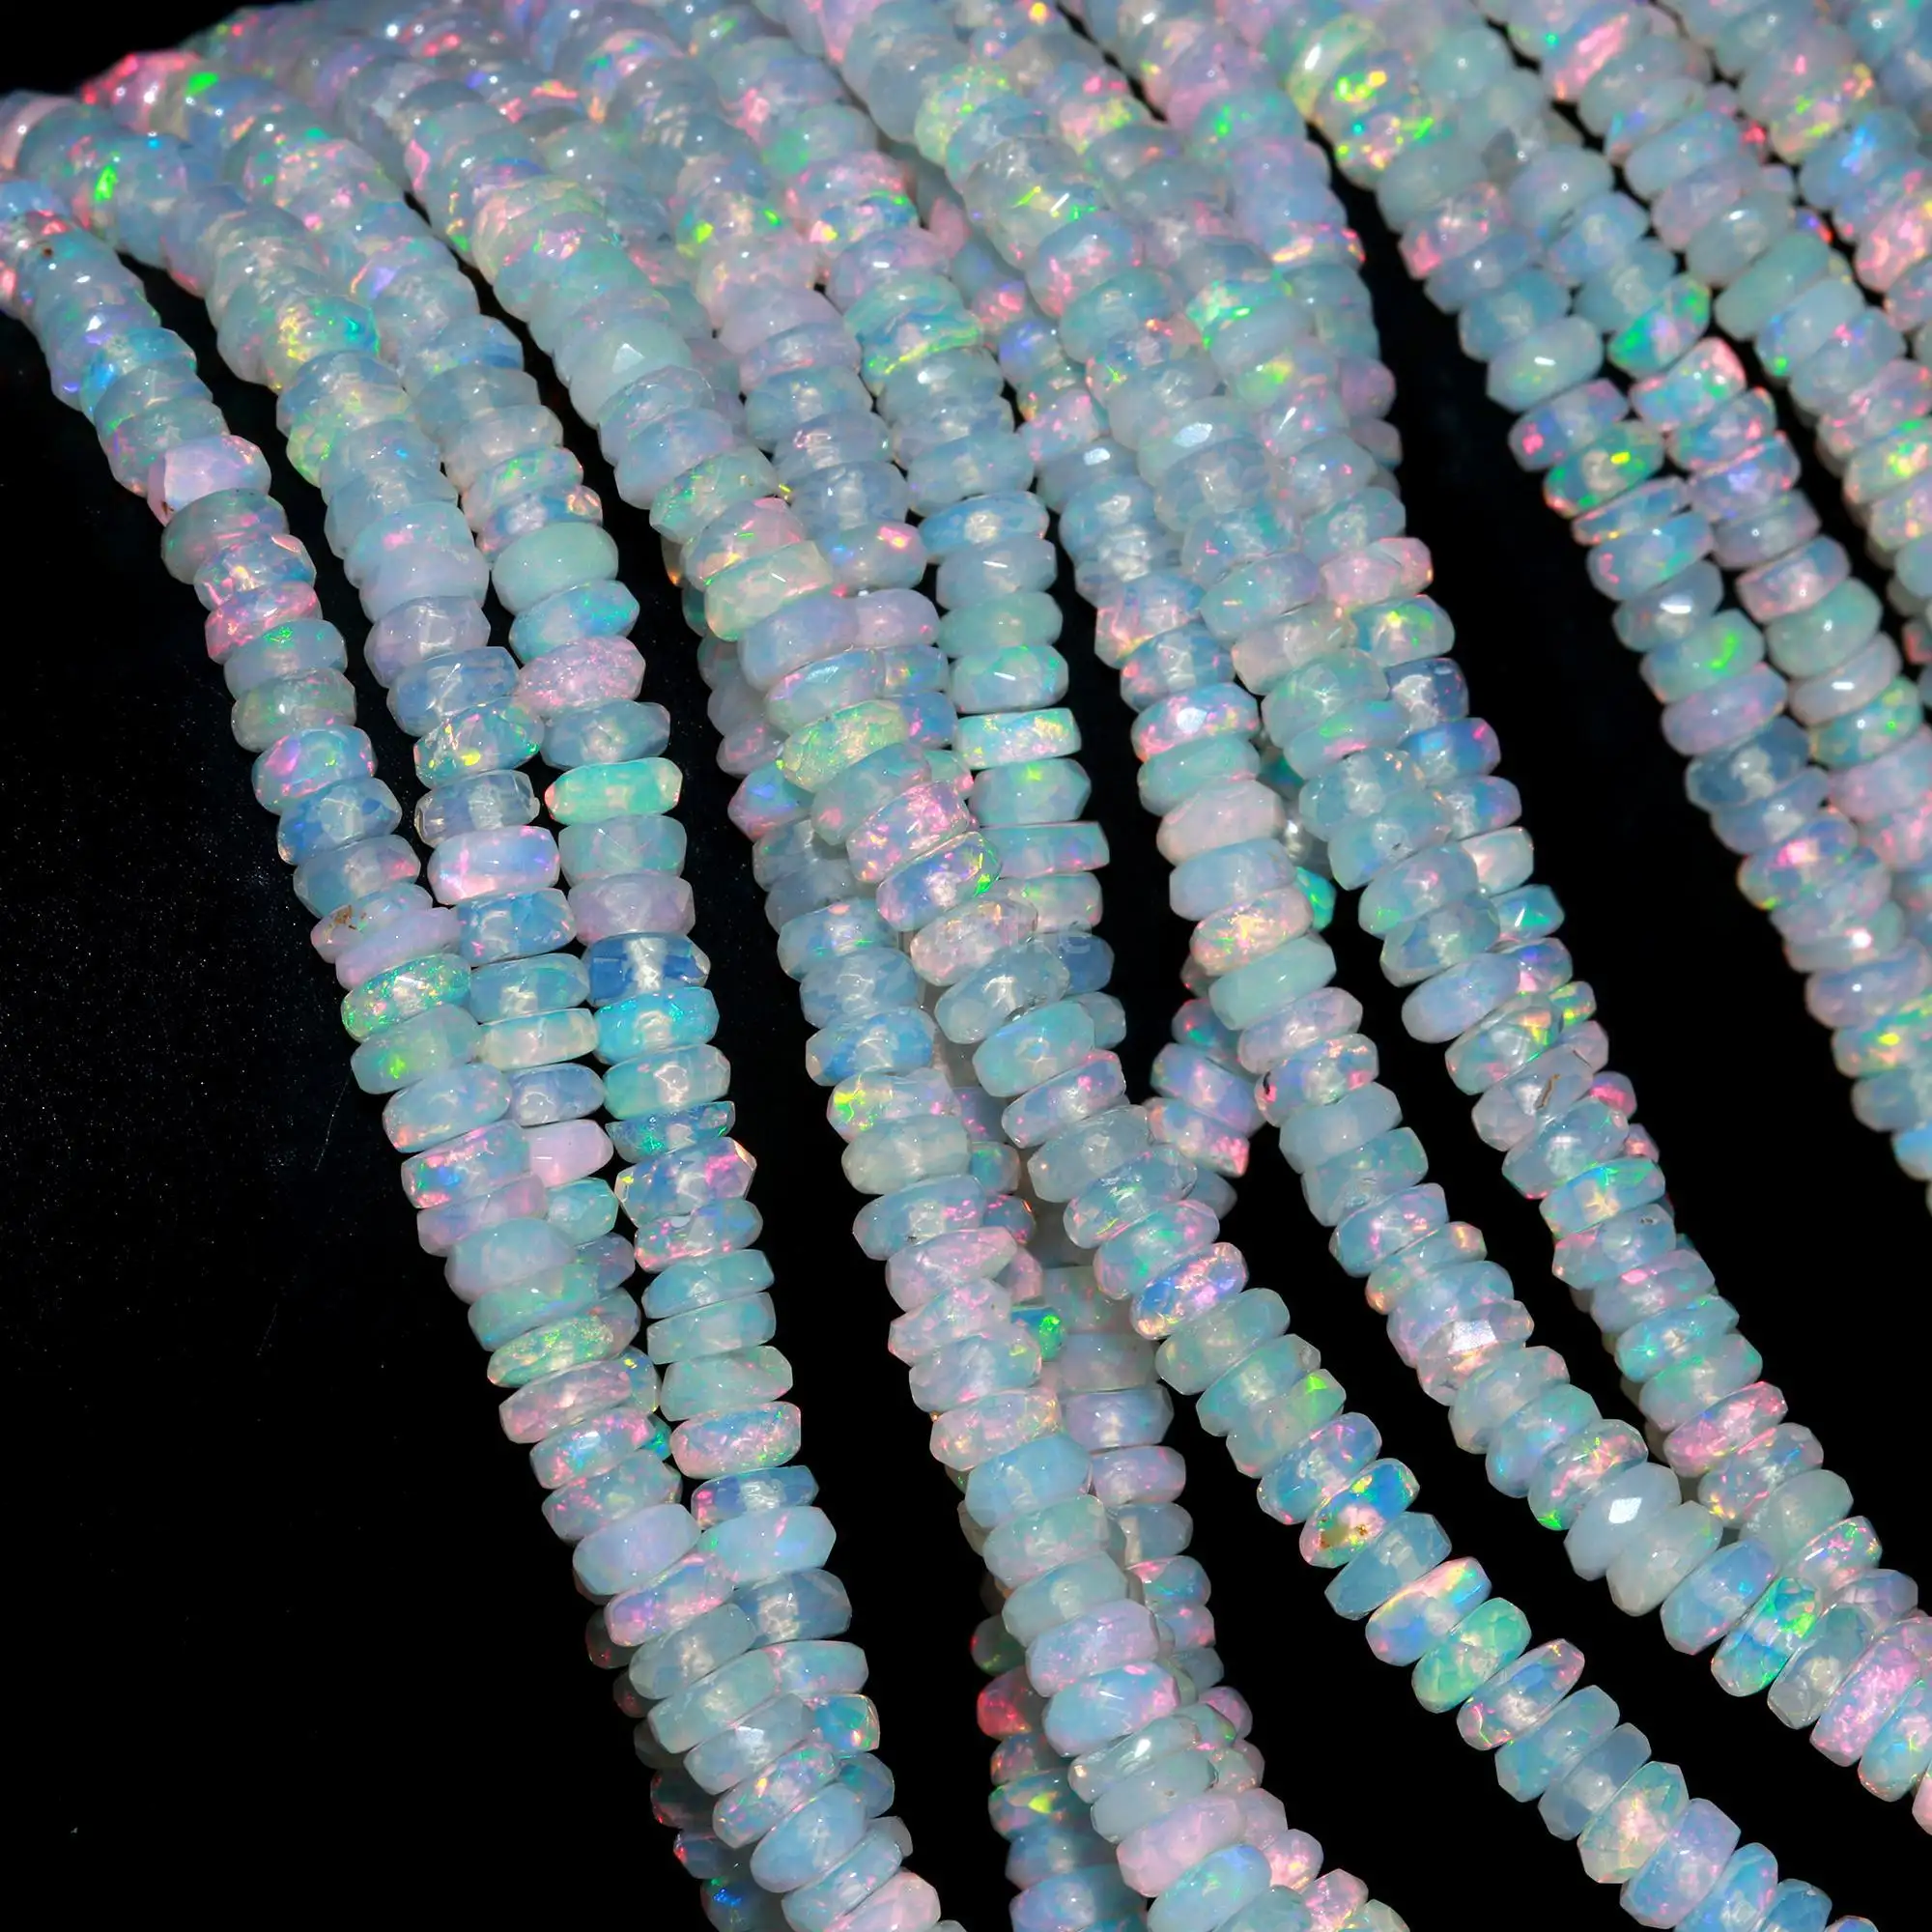 White Opal Faceted Rondelle Beads 3 - 5 mm Ethiopian Opal Wholesale White Opal Stone Beads for Jewelry Making